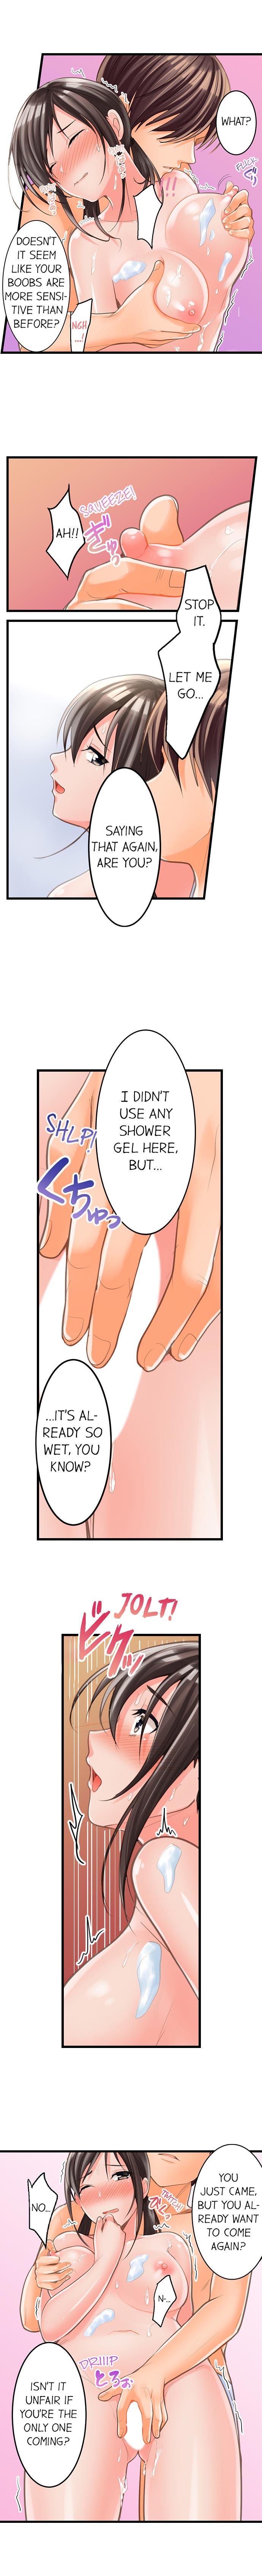 The Day She Became a Sex Toy (Complete] 43